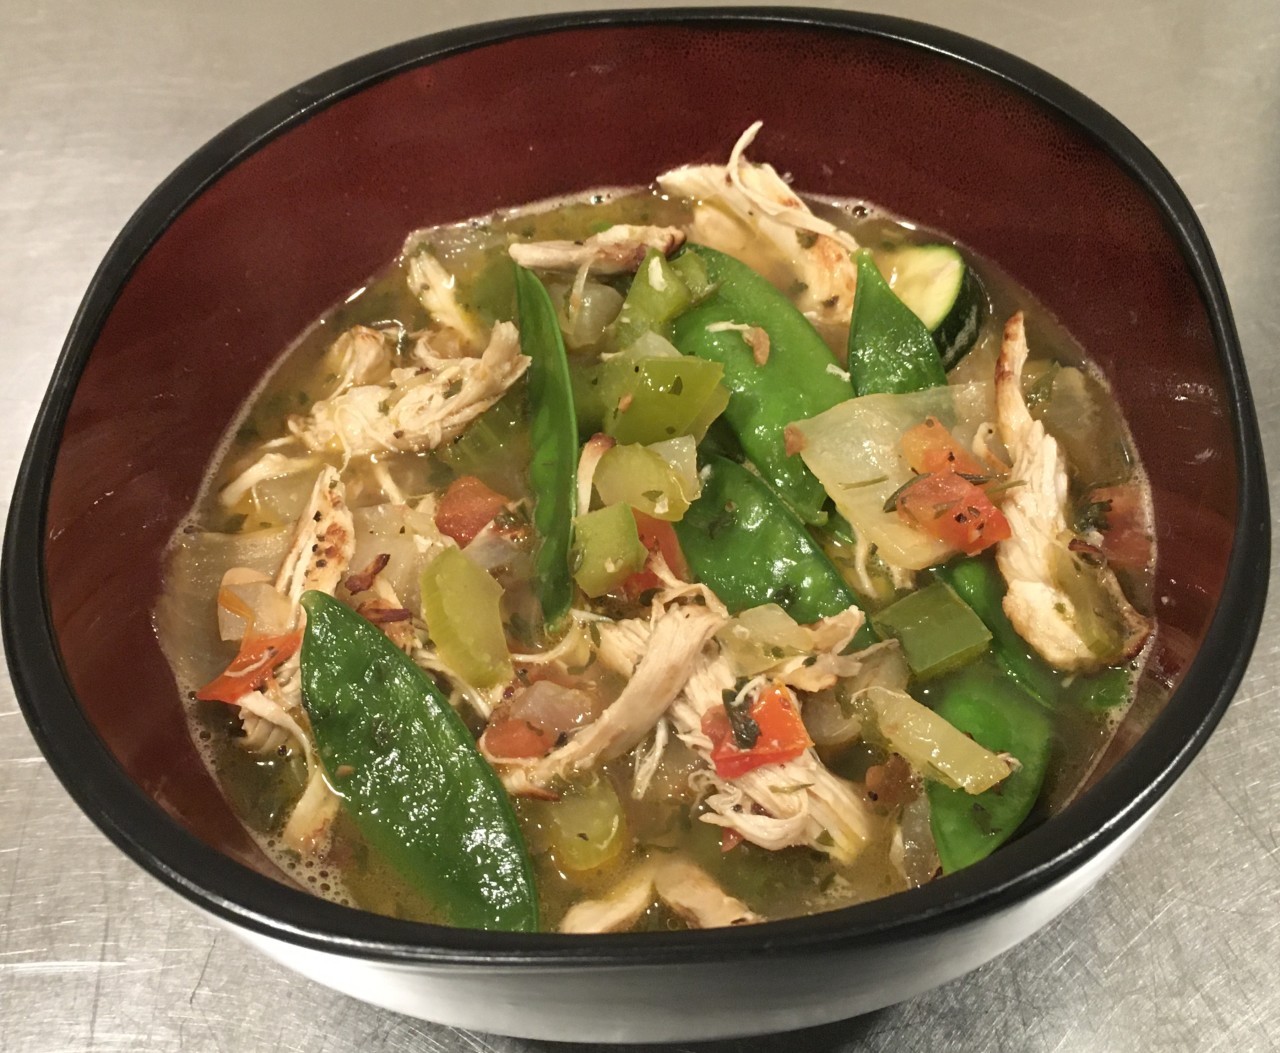 <a class="bx-tag" rel="tag" href="https://streetloc.com/view-channel-profile/whatsfordinner"><s>#</s><b>whatsfordinner</b></a> That there is some delicious, homemade Chicken and Veggie Soup